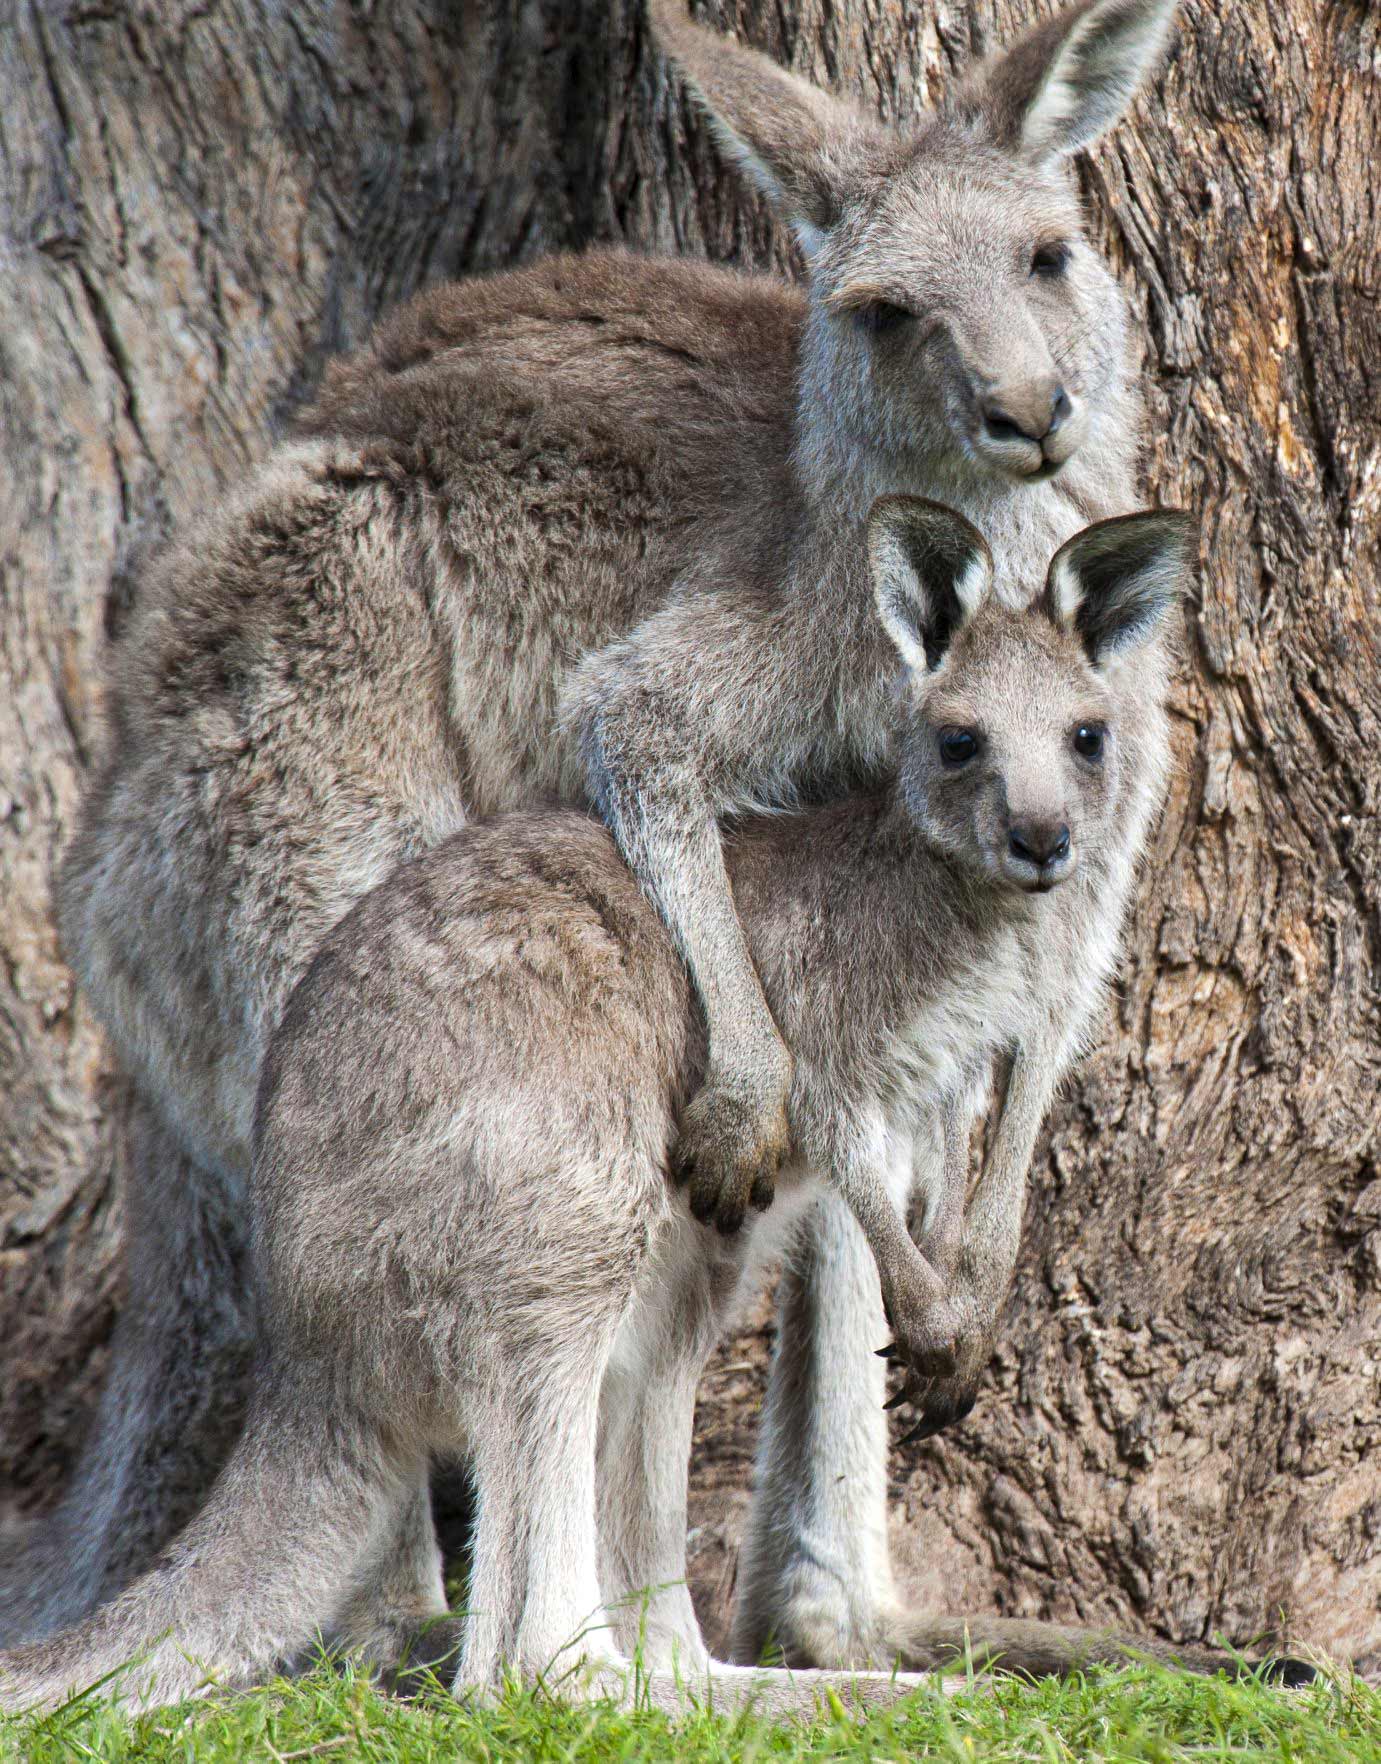 A standing mother kangaroo embraces her joey loveingly